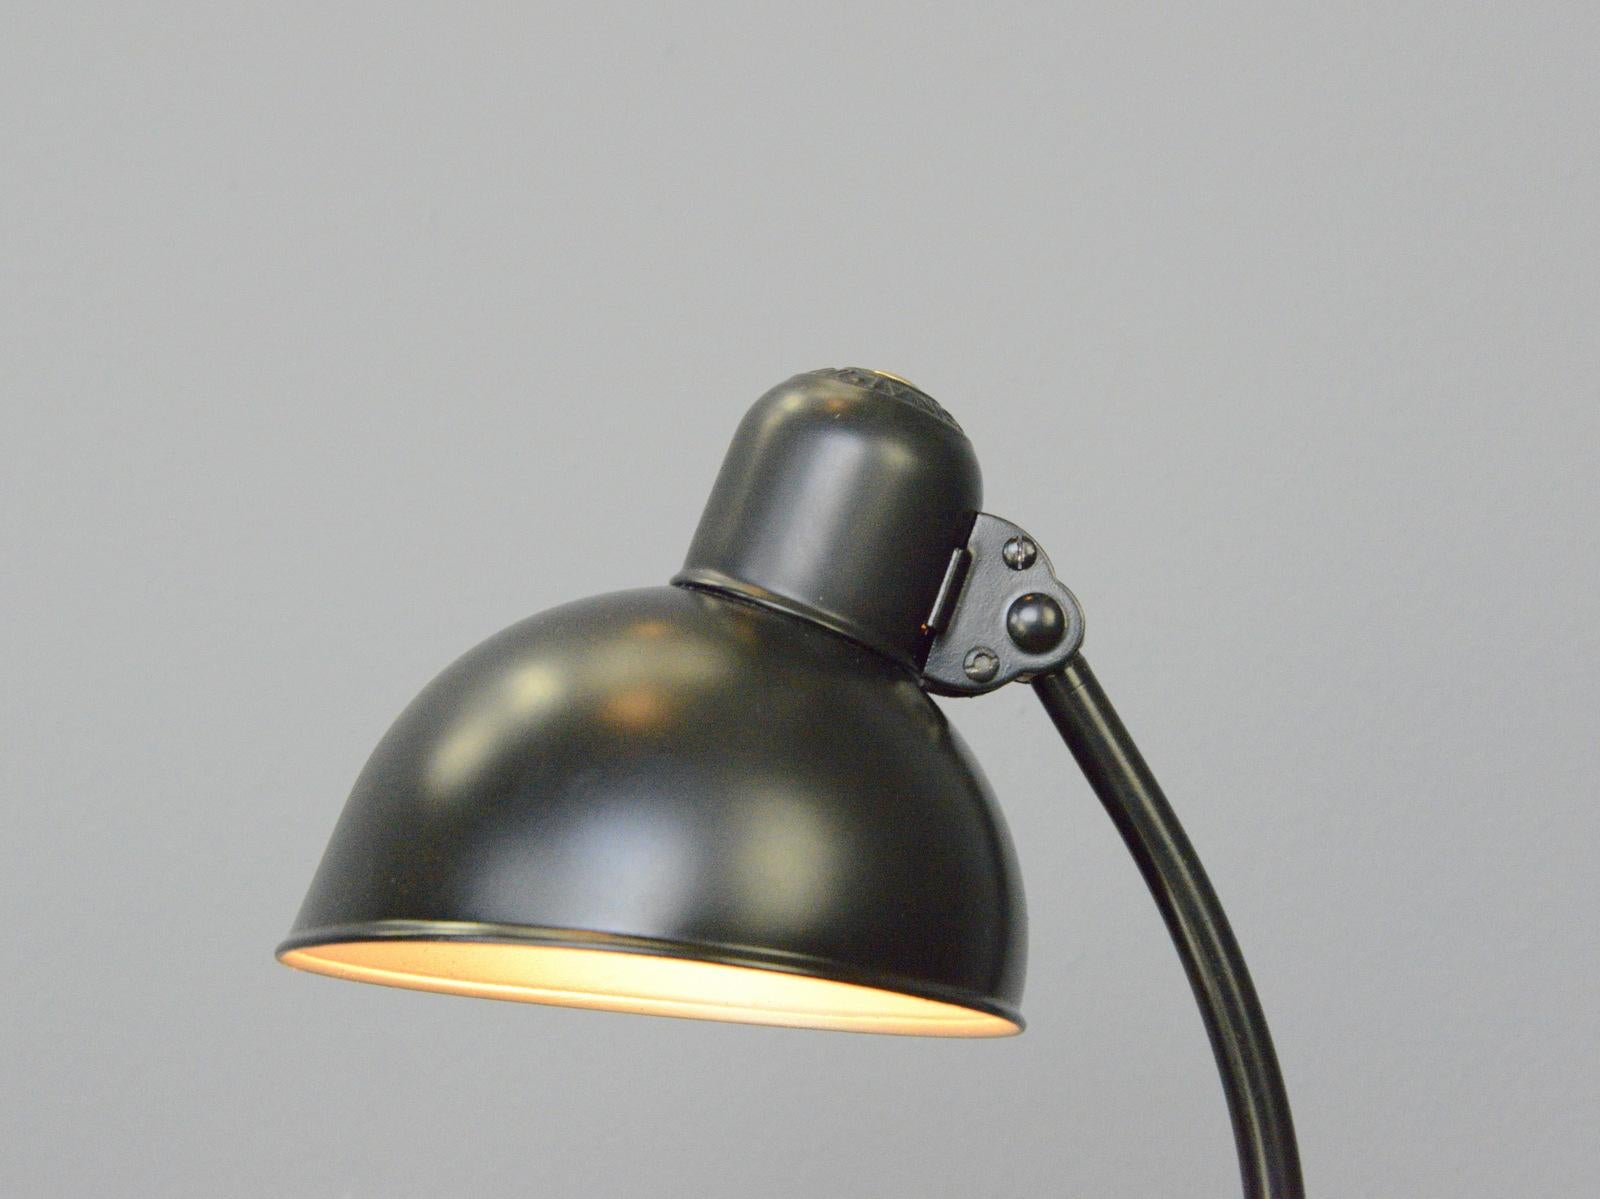 Bauhaus Model 6556 Table Lamps by Kaiser Idell, circa 1930s